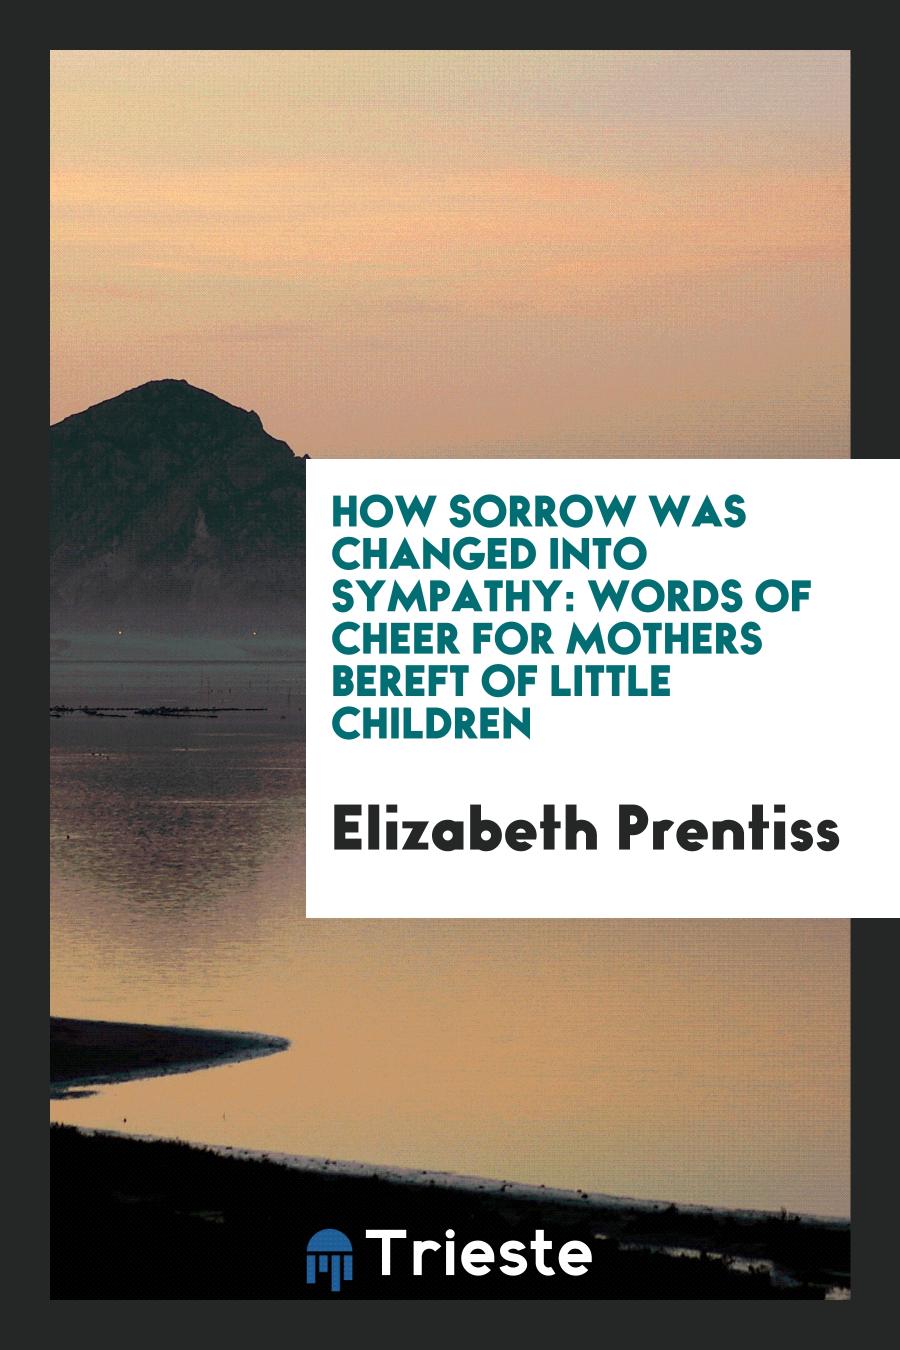 How Sorrow Was Changed into Sympathy: Words of Cheer for Mothers Bereft of Little Children